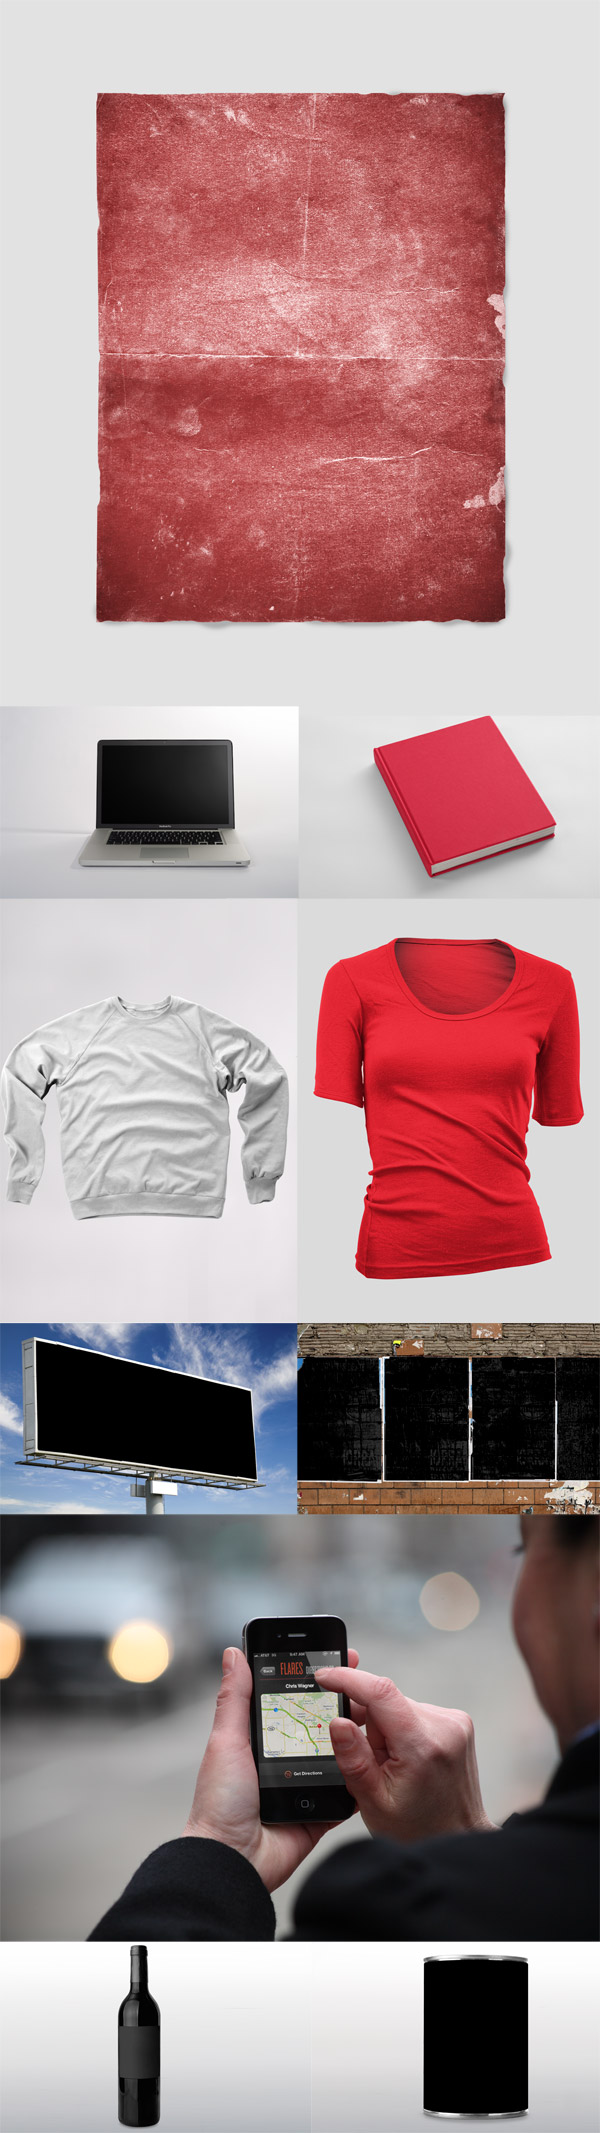 Realistic Apparel Templates Pack